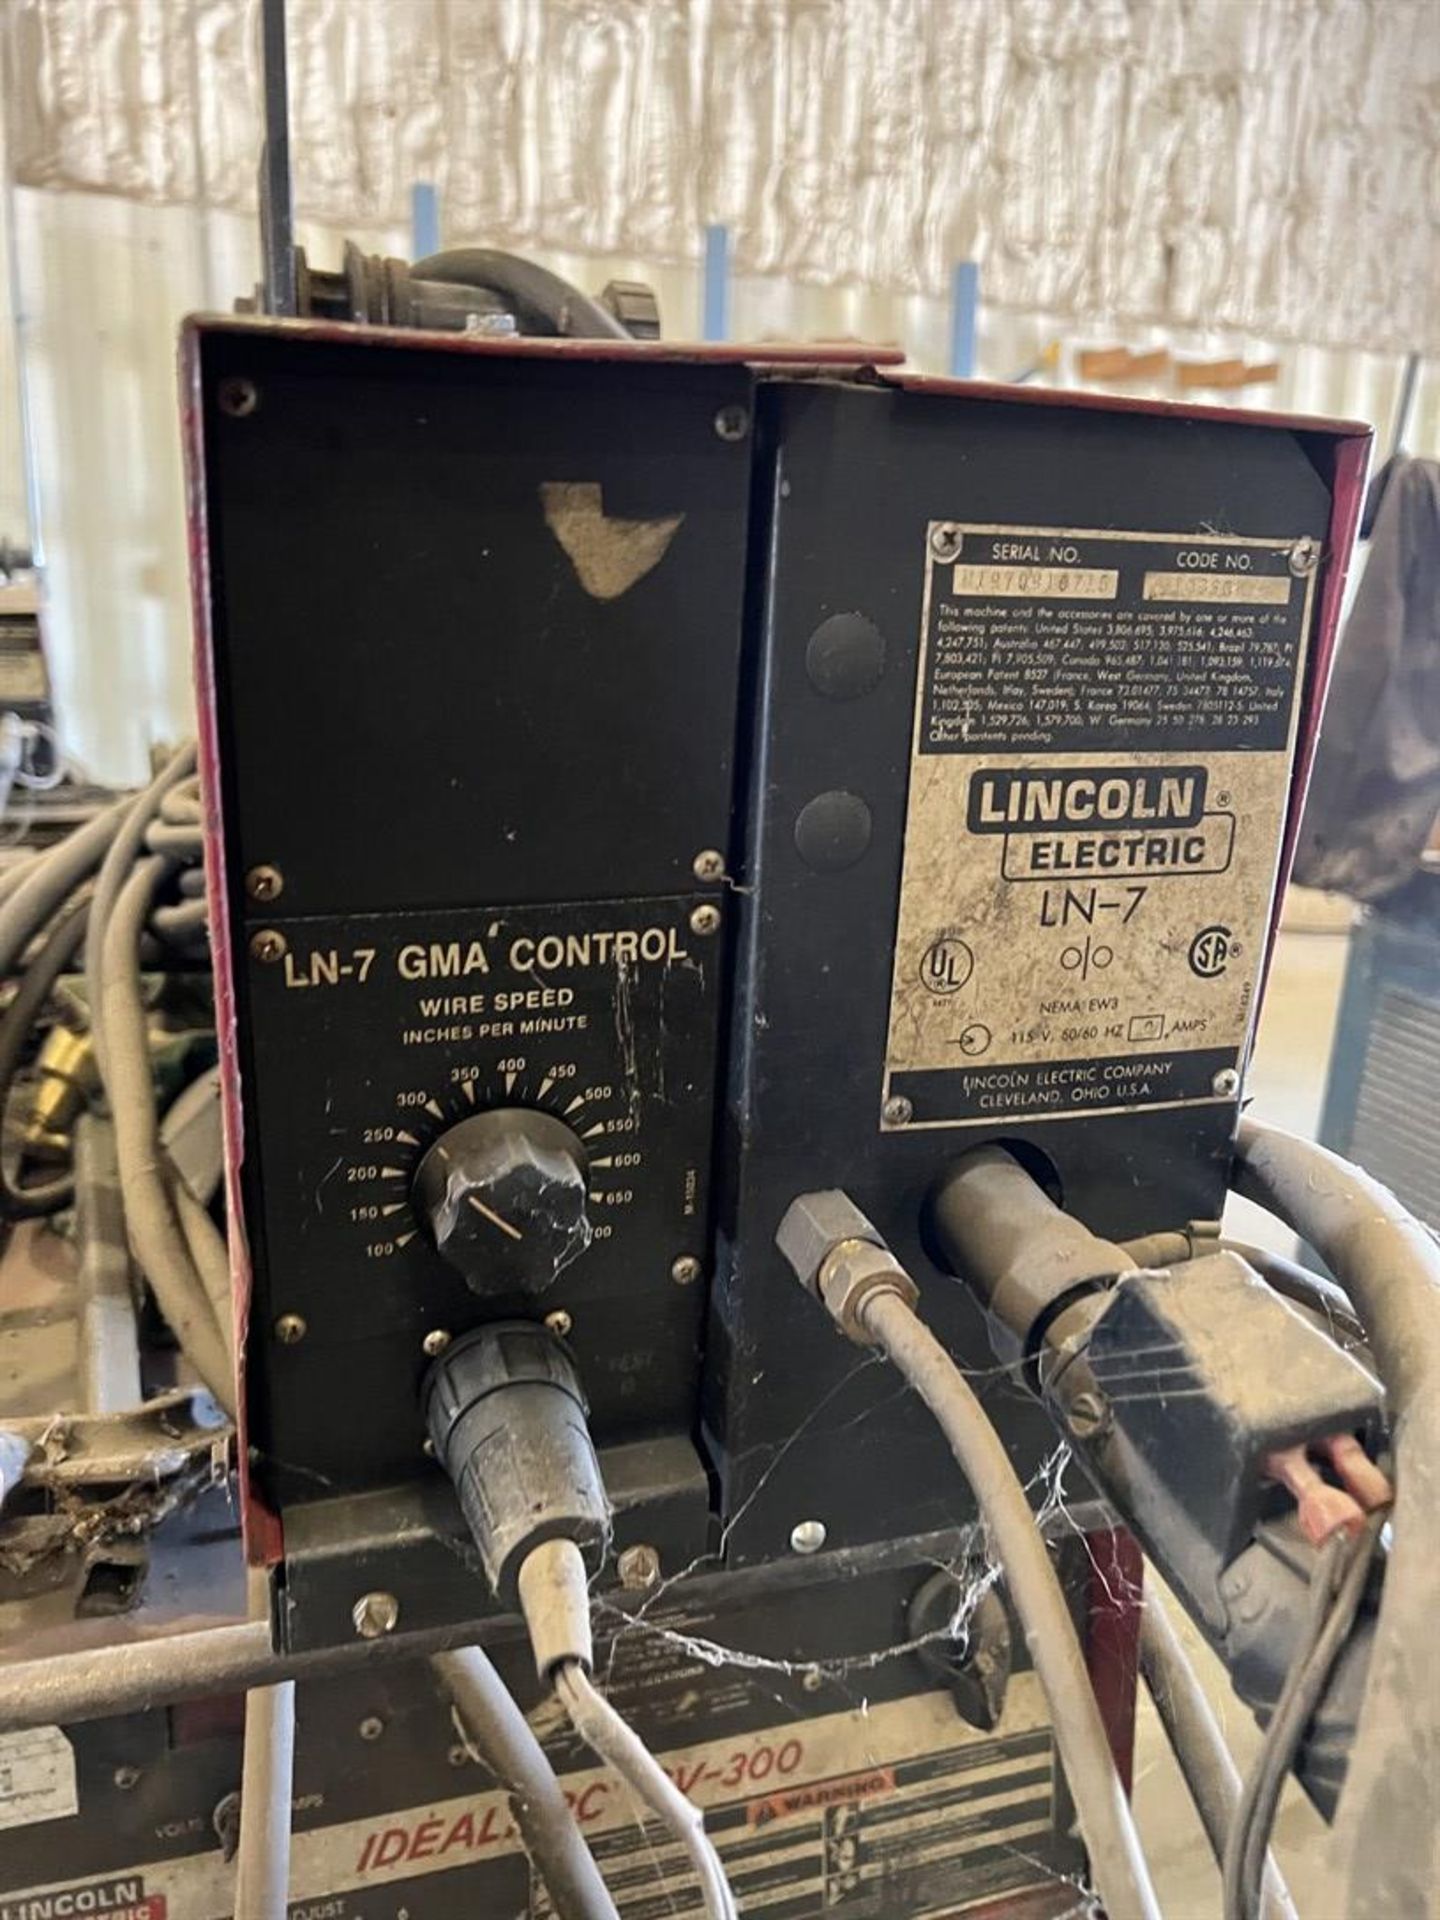 LINCOLN CV-300 MIG Welder, s/n AC849184, w/ Lincoln LN-7 Wire Feeder - Image 5 of 5